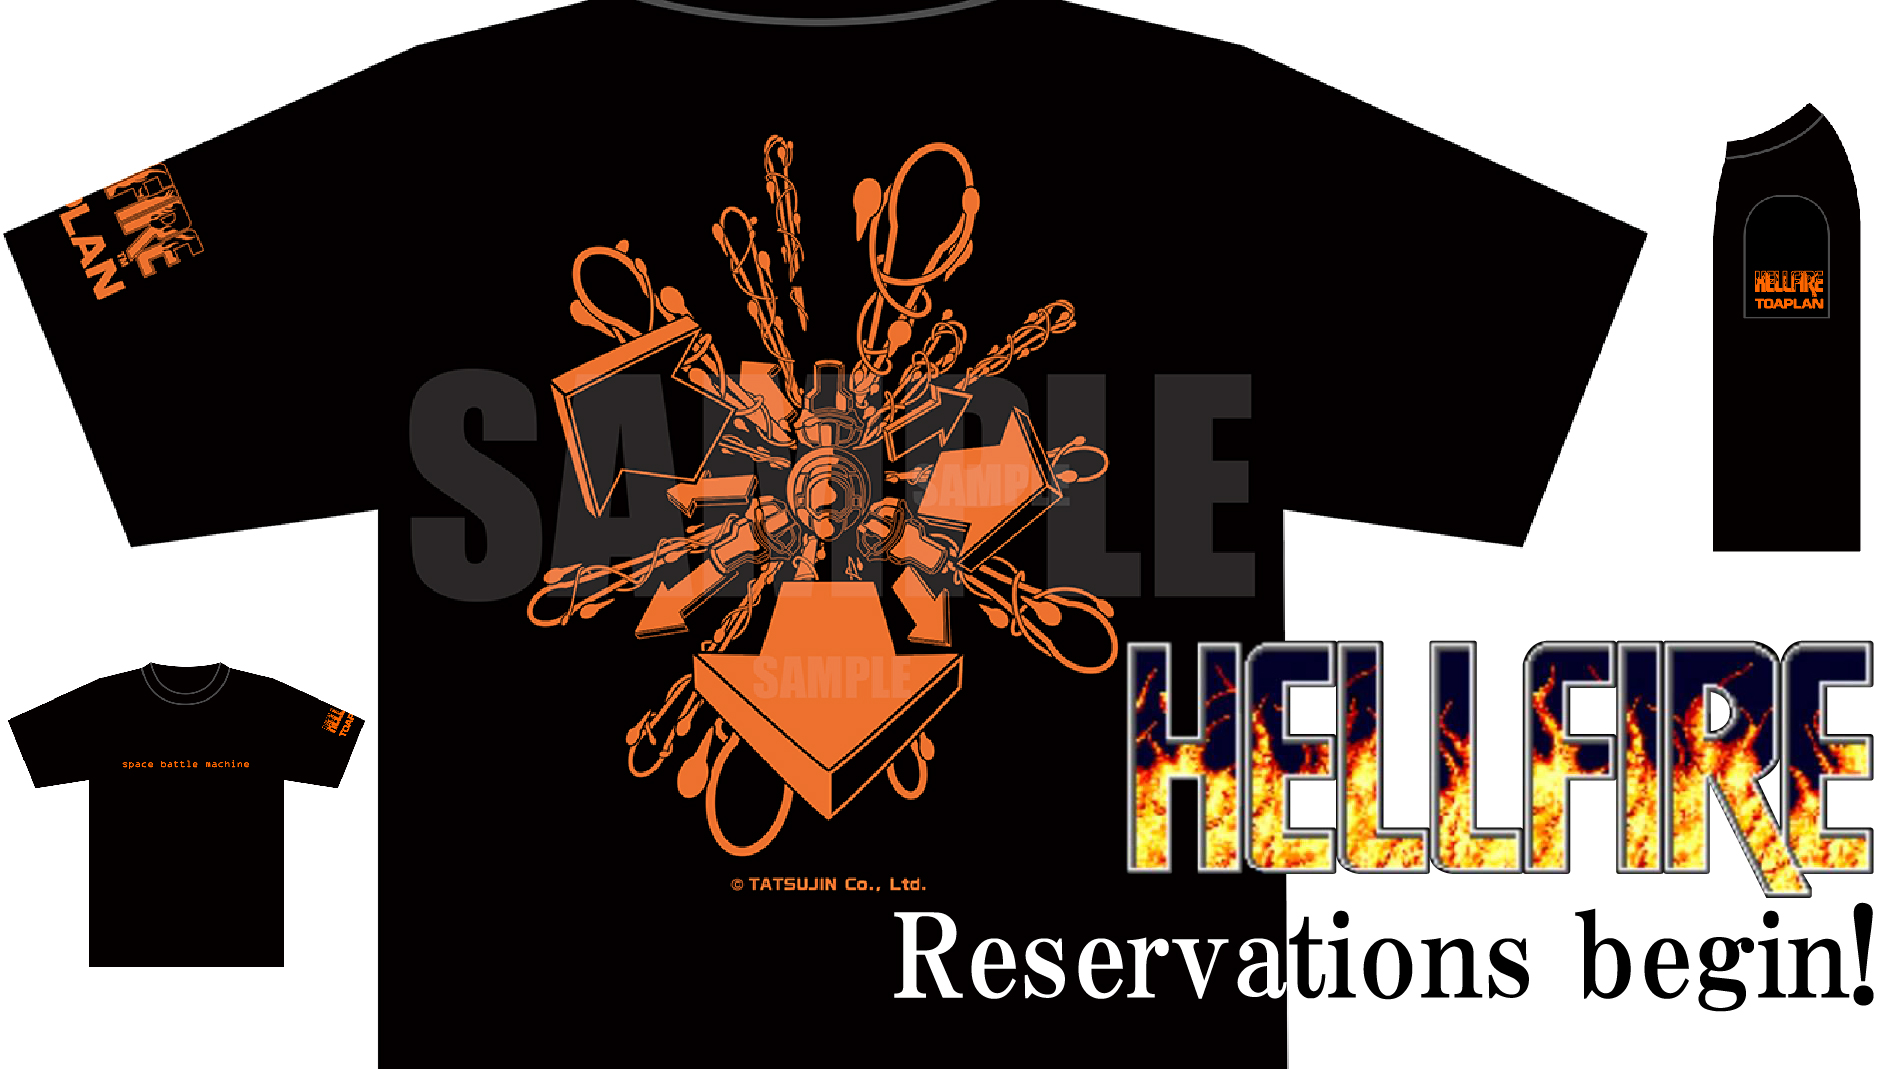 WAXON, a retro game apparel company, has begun taking reservations for the "Hellfire" T-shirt!